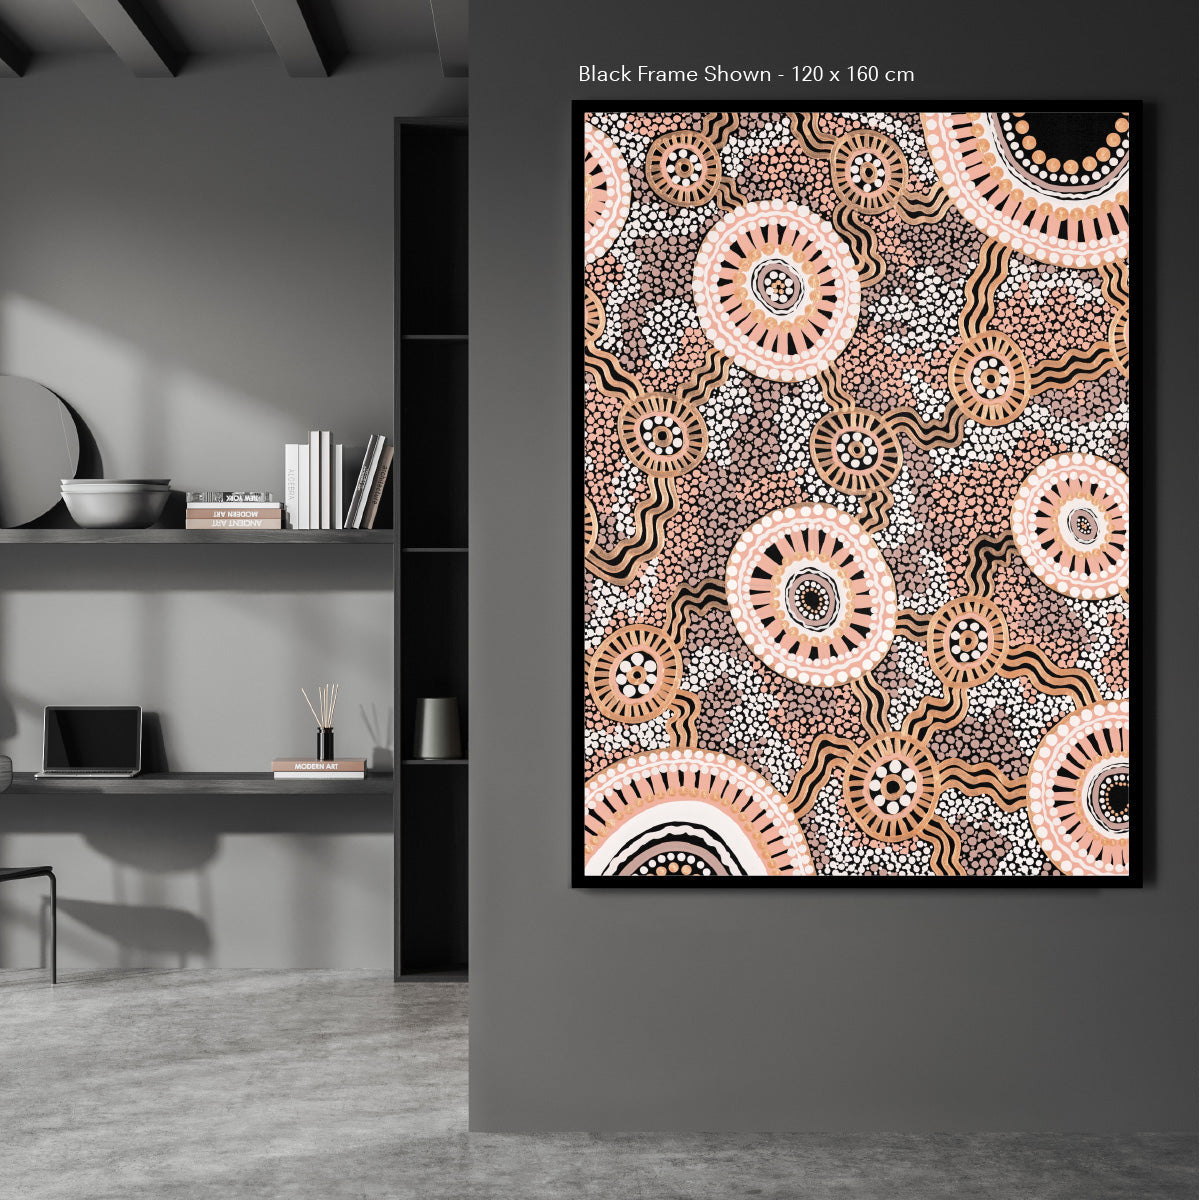 Framed Canvas wall art shown in a home, in a black frame in extra large size